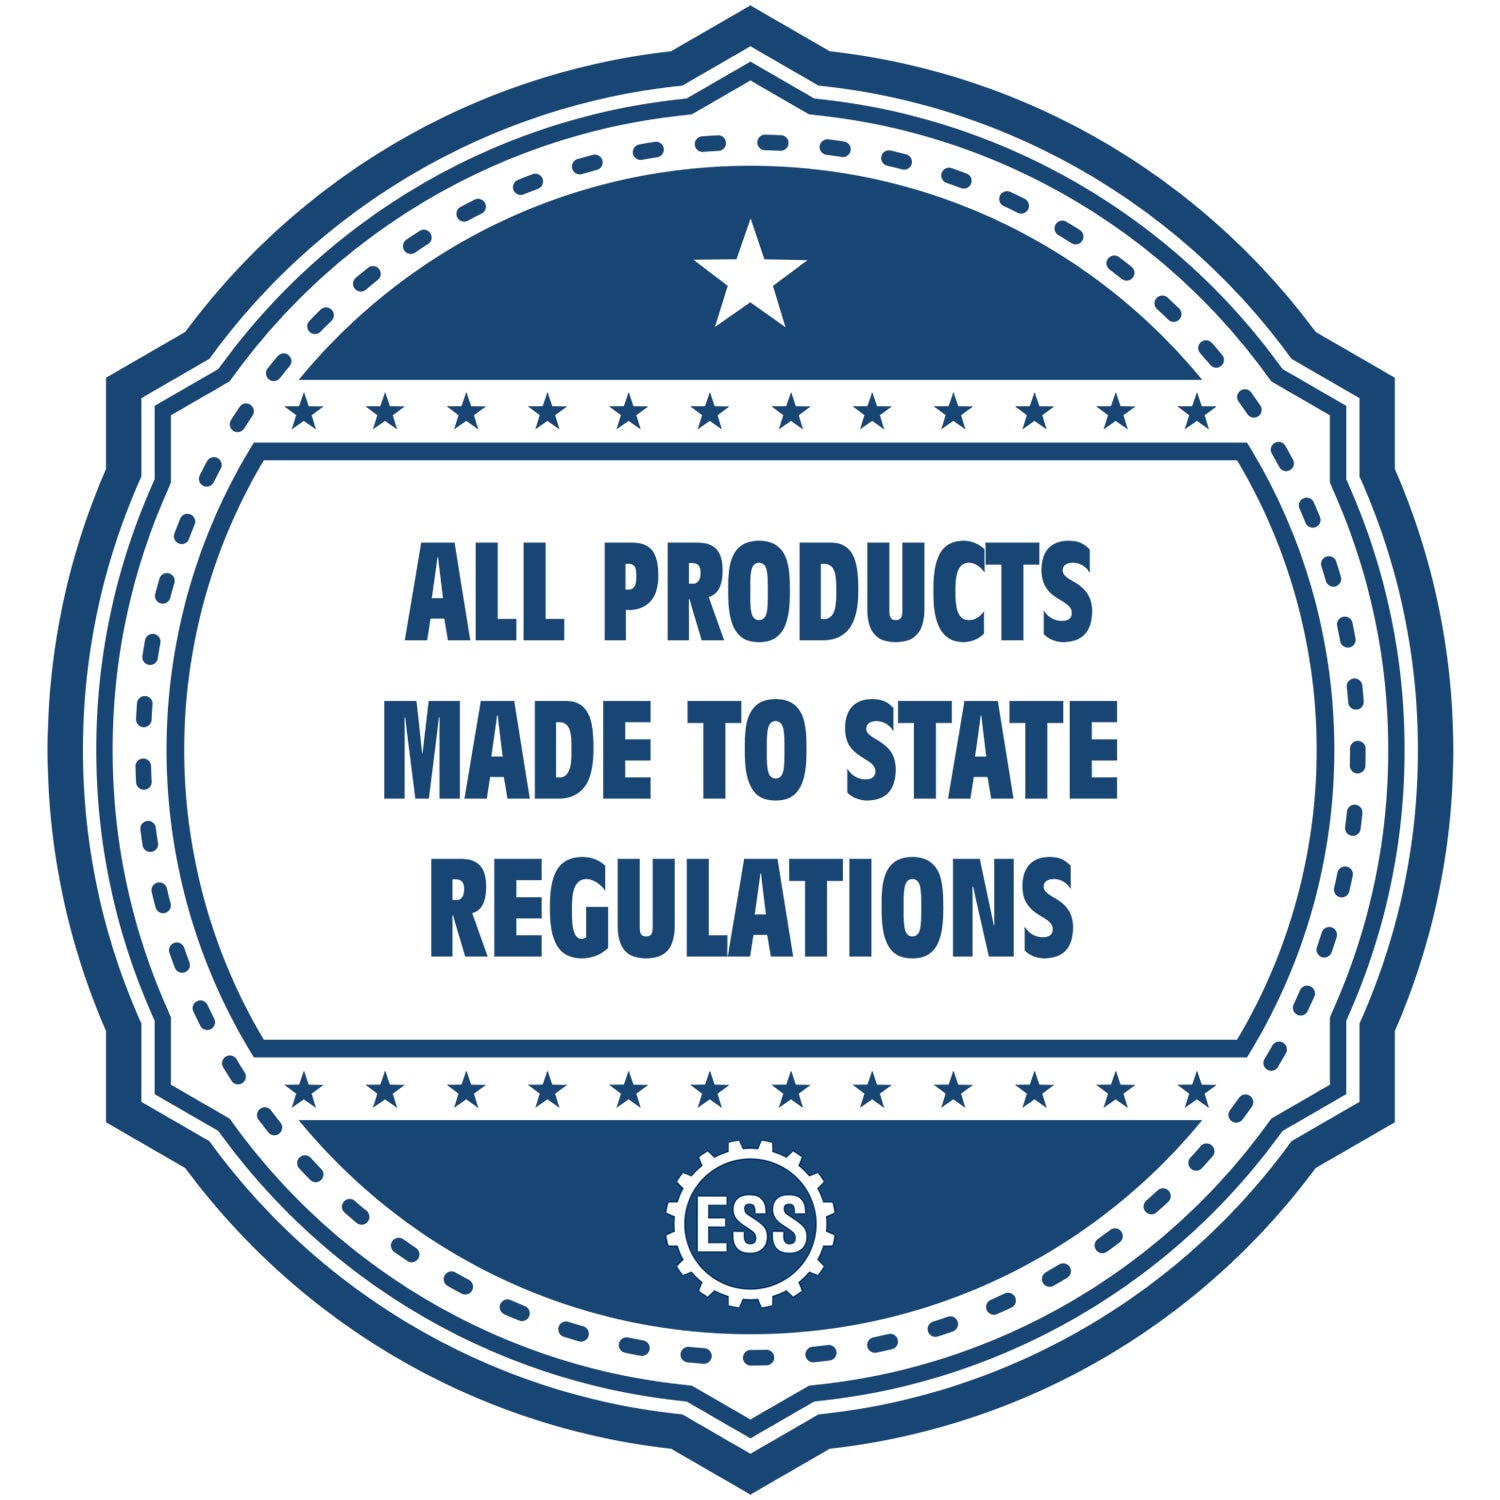 An icon or badge element for the Long Reach Oregon PE Seal showing that this product is made in compliance with state regulations.